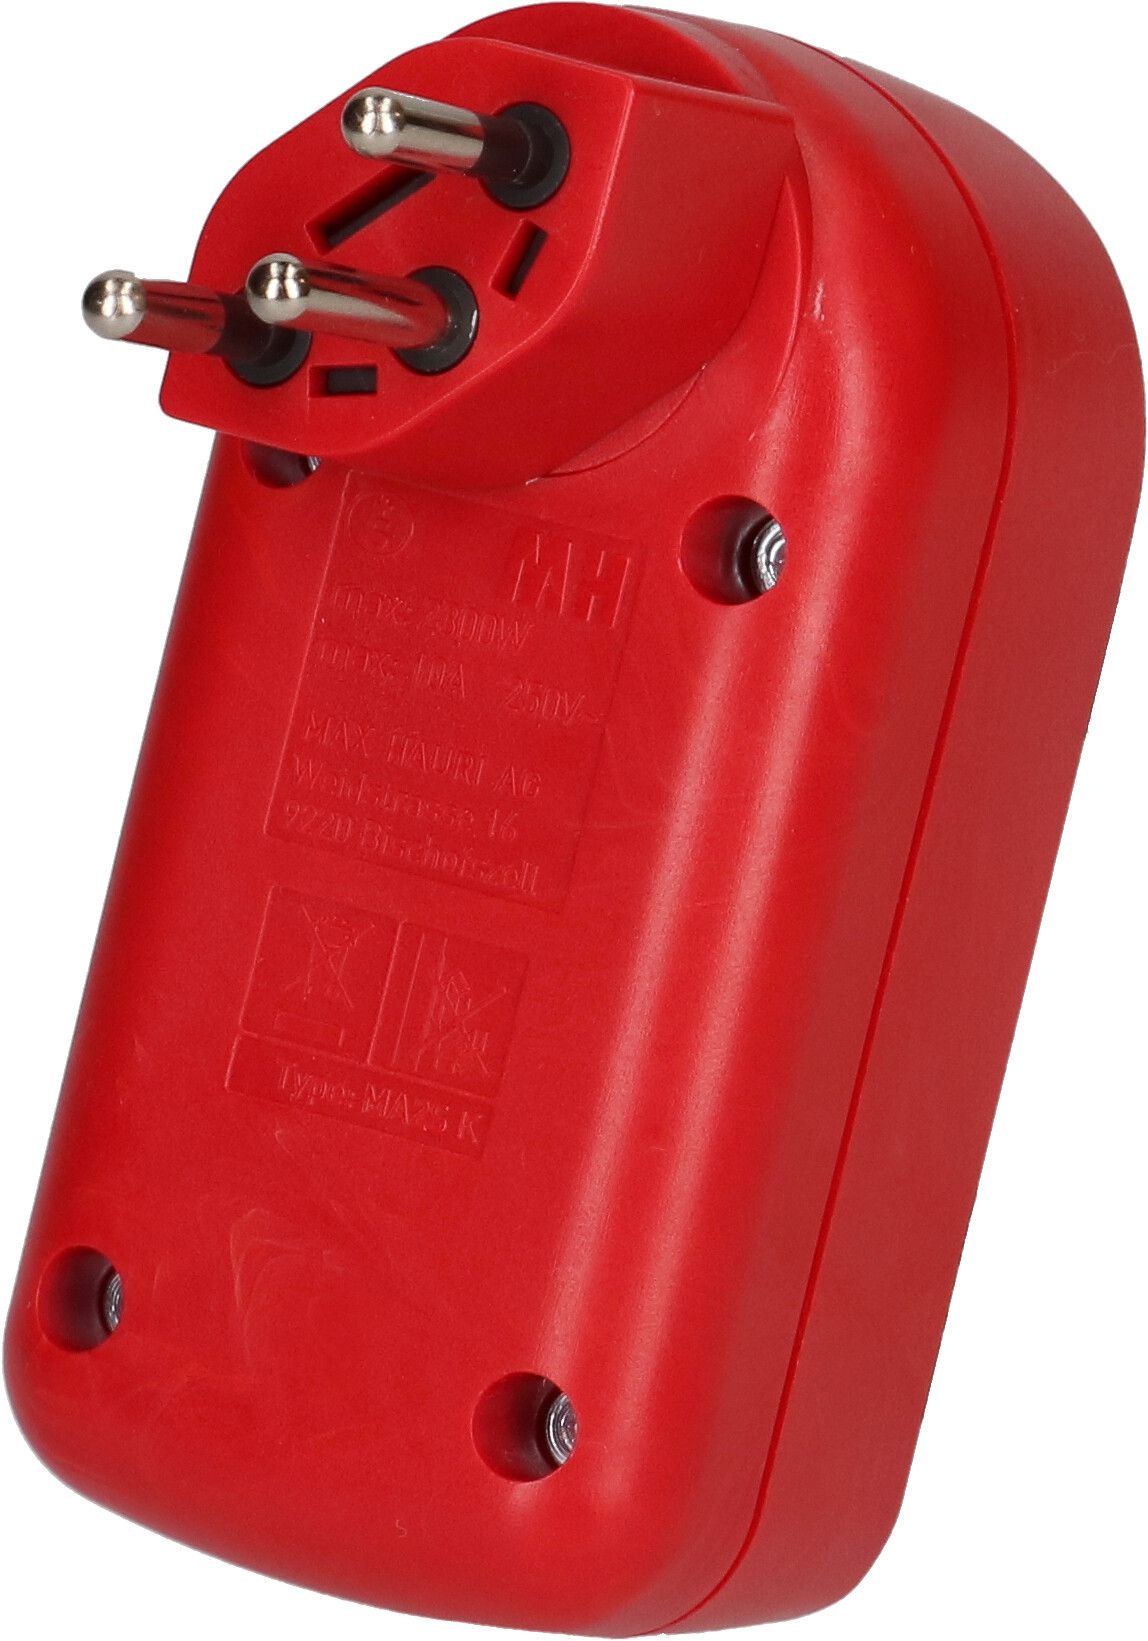 Adaptor 2x type 13 turnable switch red